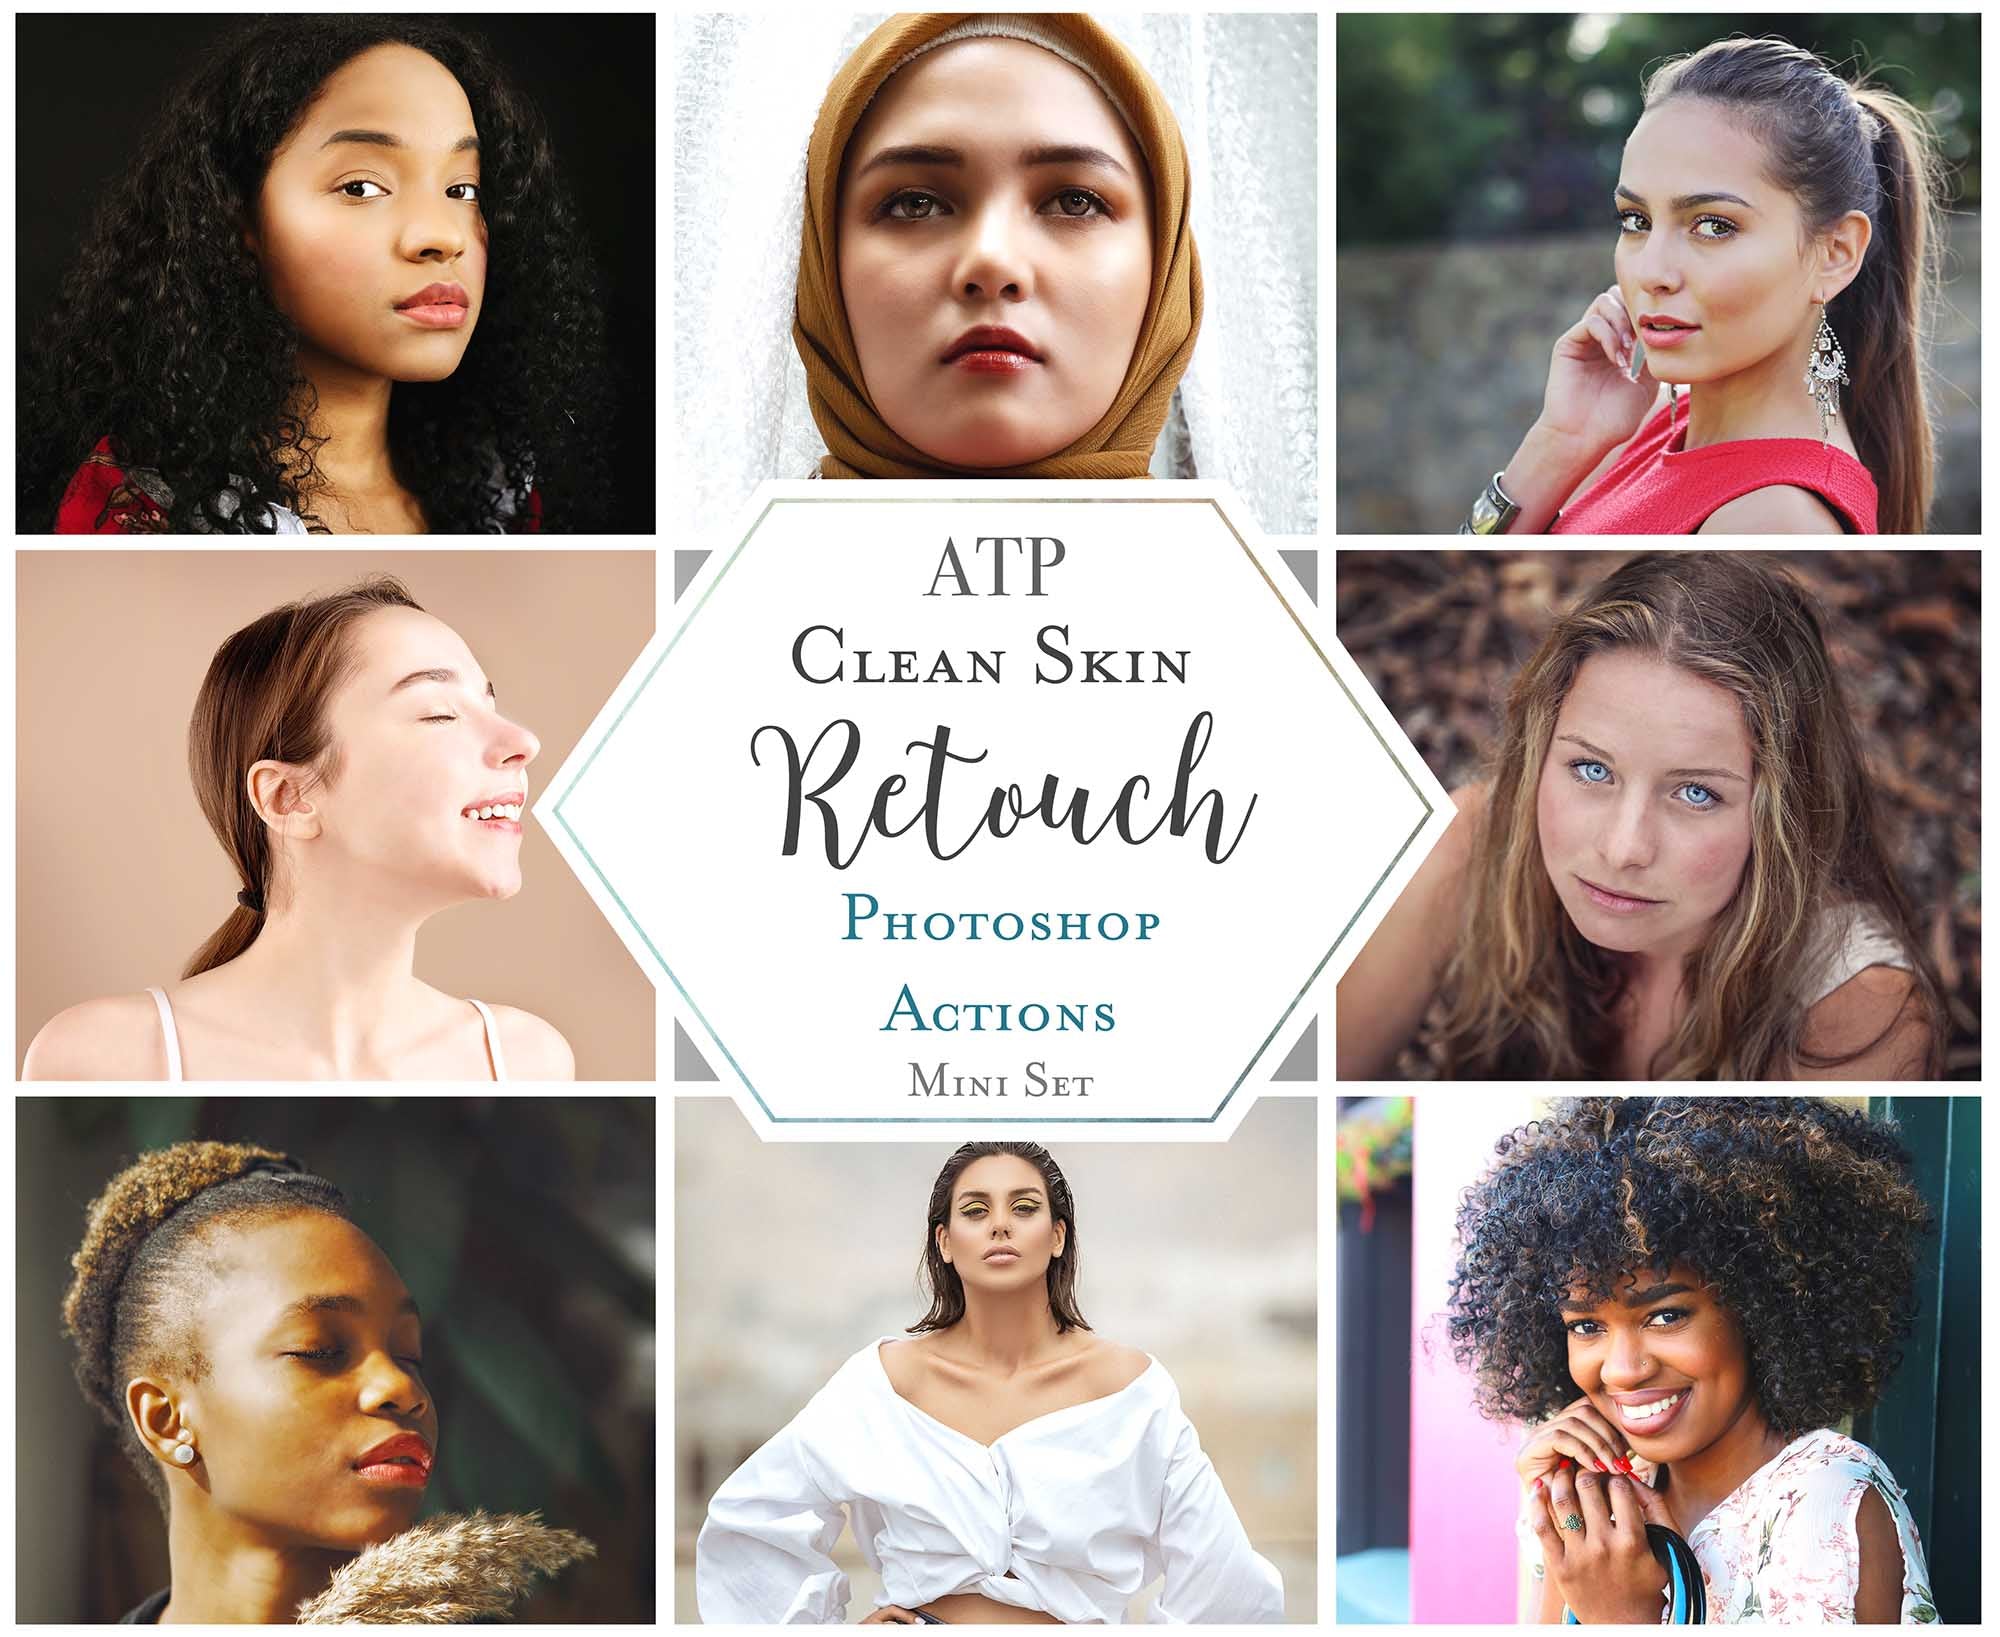 Photoshop Actions for Photography Edits. PS atn files are compatible with all versions of PS CS6. Photoshop Actions for professional photographers, photo edits and Instagram influencers. Warm, Rich, light, Matte. For Wedding, Newborn, Studio Photography. By ATP Textures